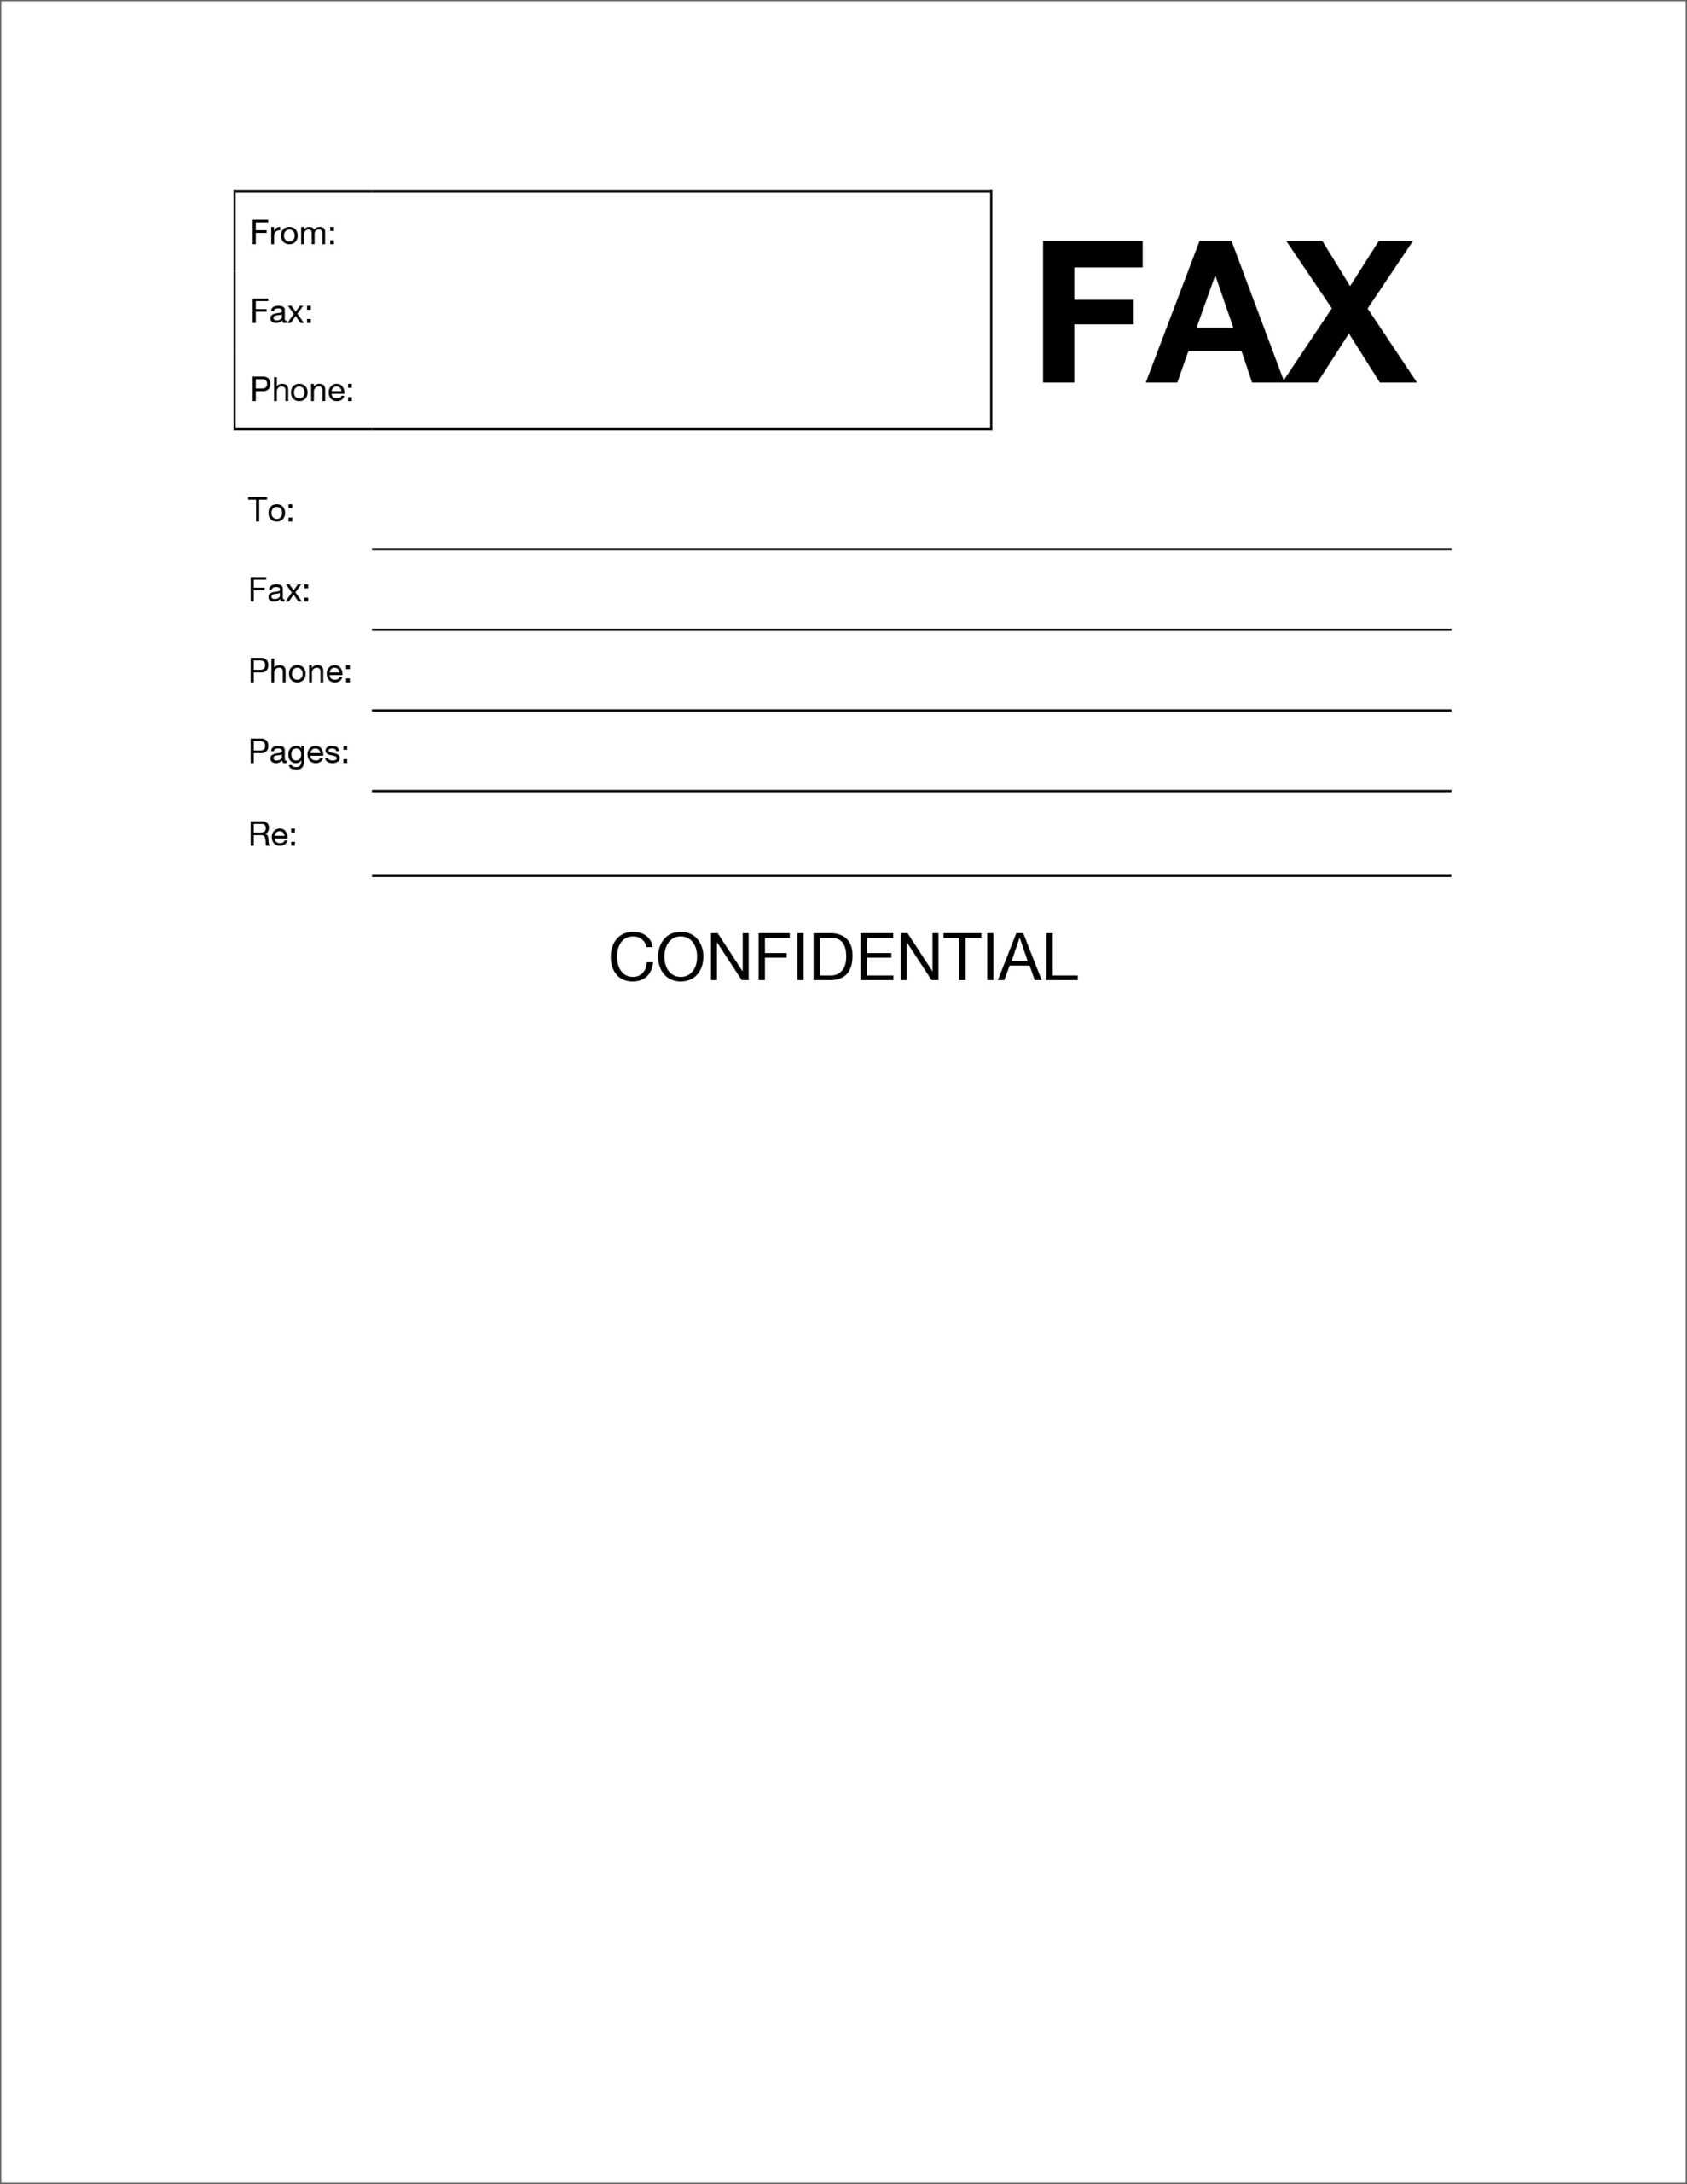 Microsoft Office Fax Cover Sheet Template – Falep.midnightpig.co Inside Fax Template Word 2010